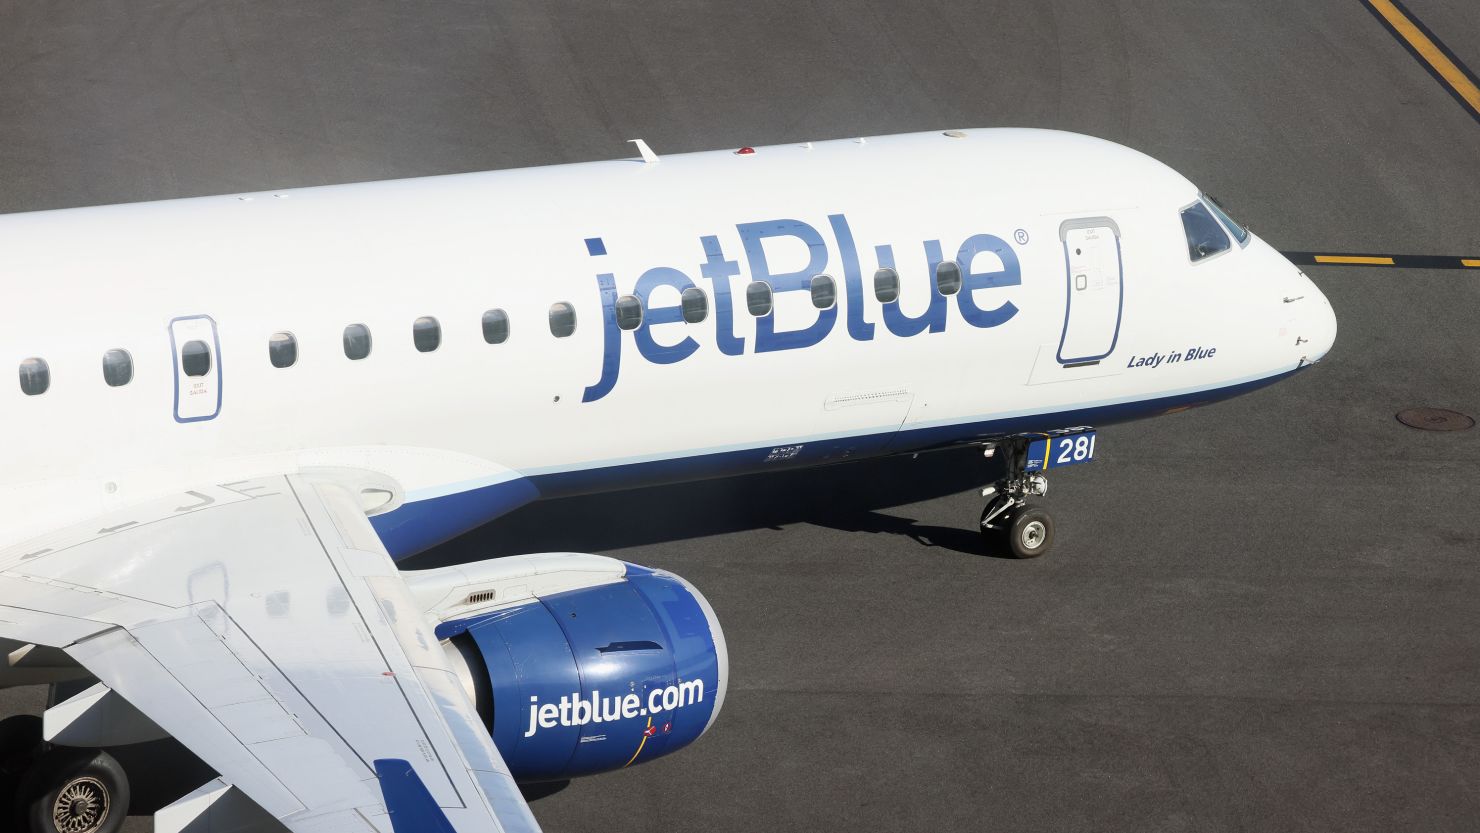 American Airlines and JetBlue have to break up their partnership, court  rules